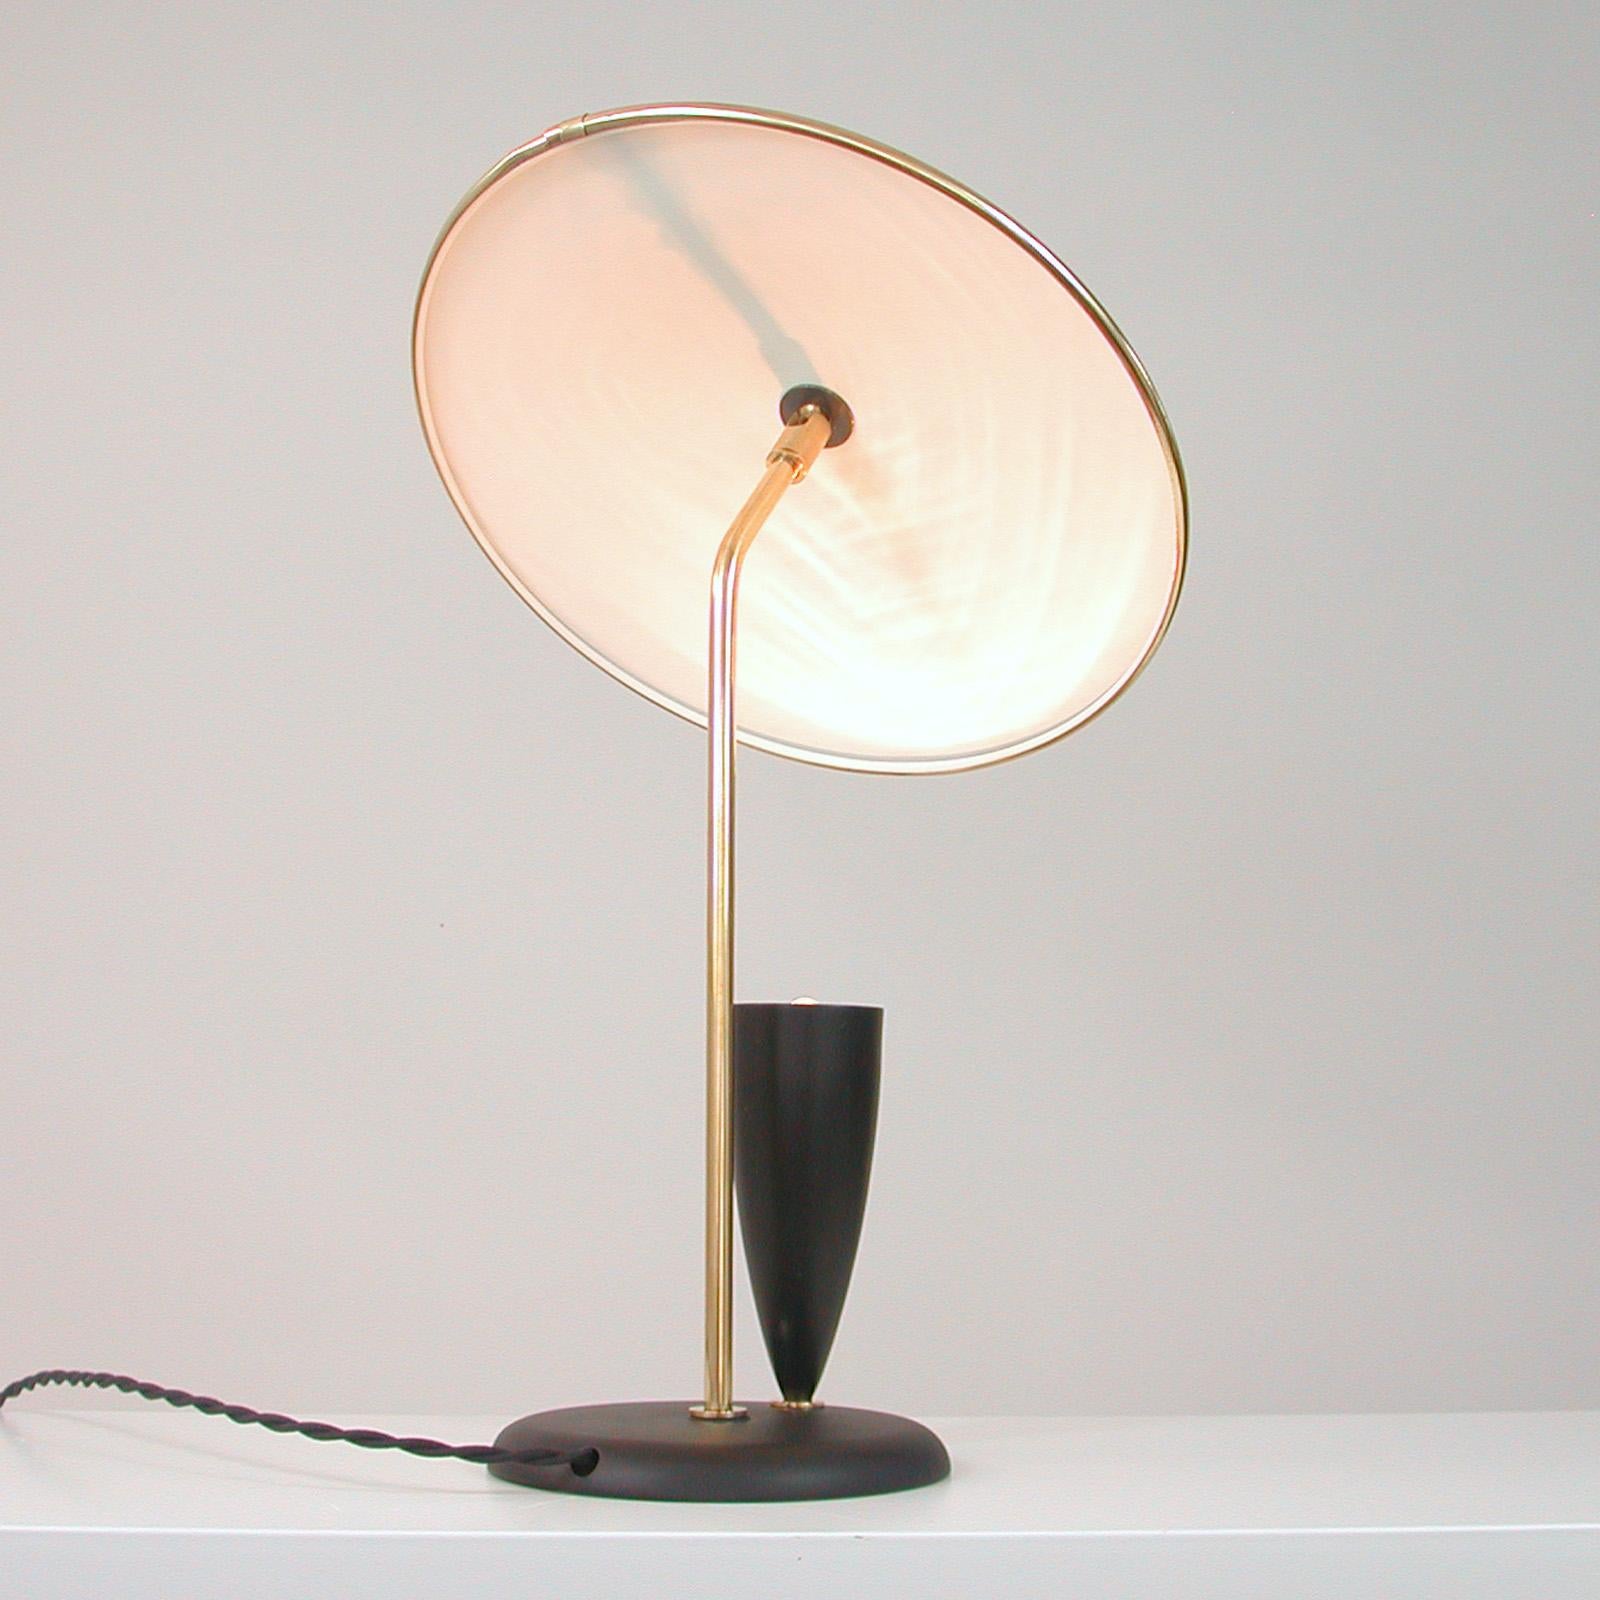 French Midcentury Reflecting Black and Brass Table Lamp, 1950s For Sale 8